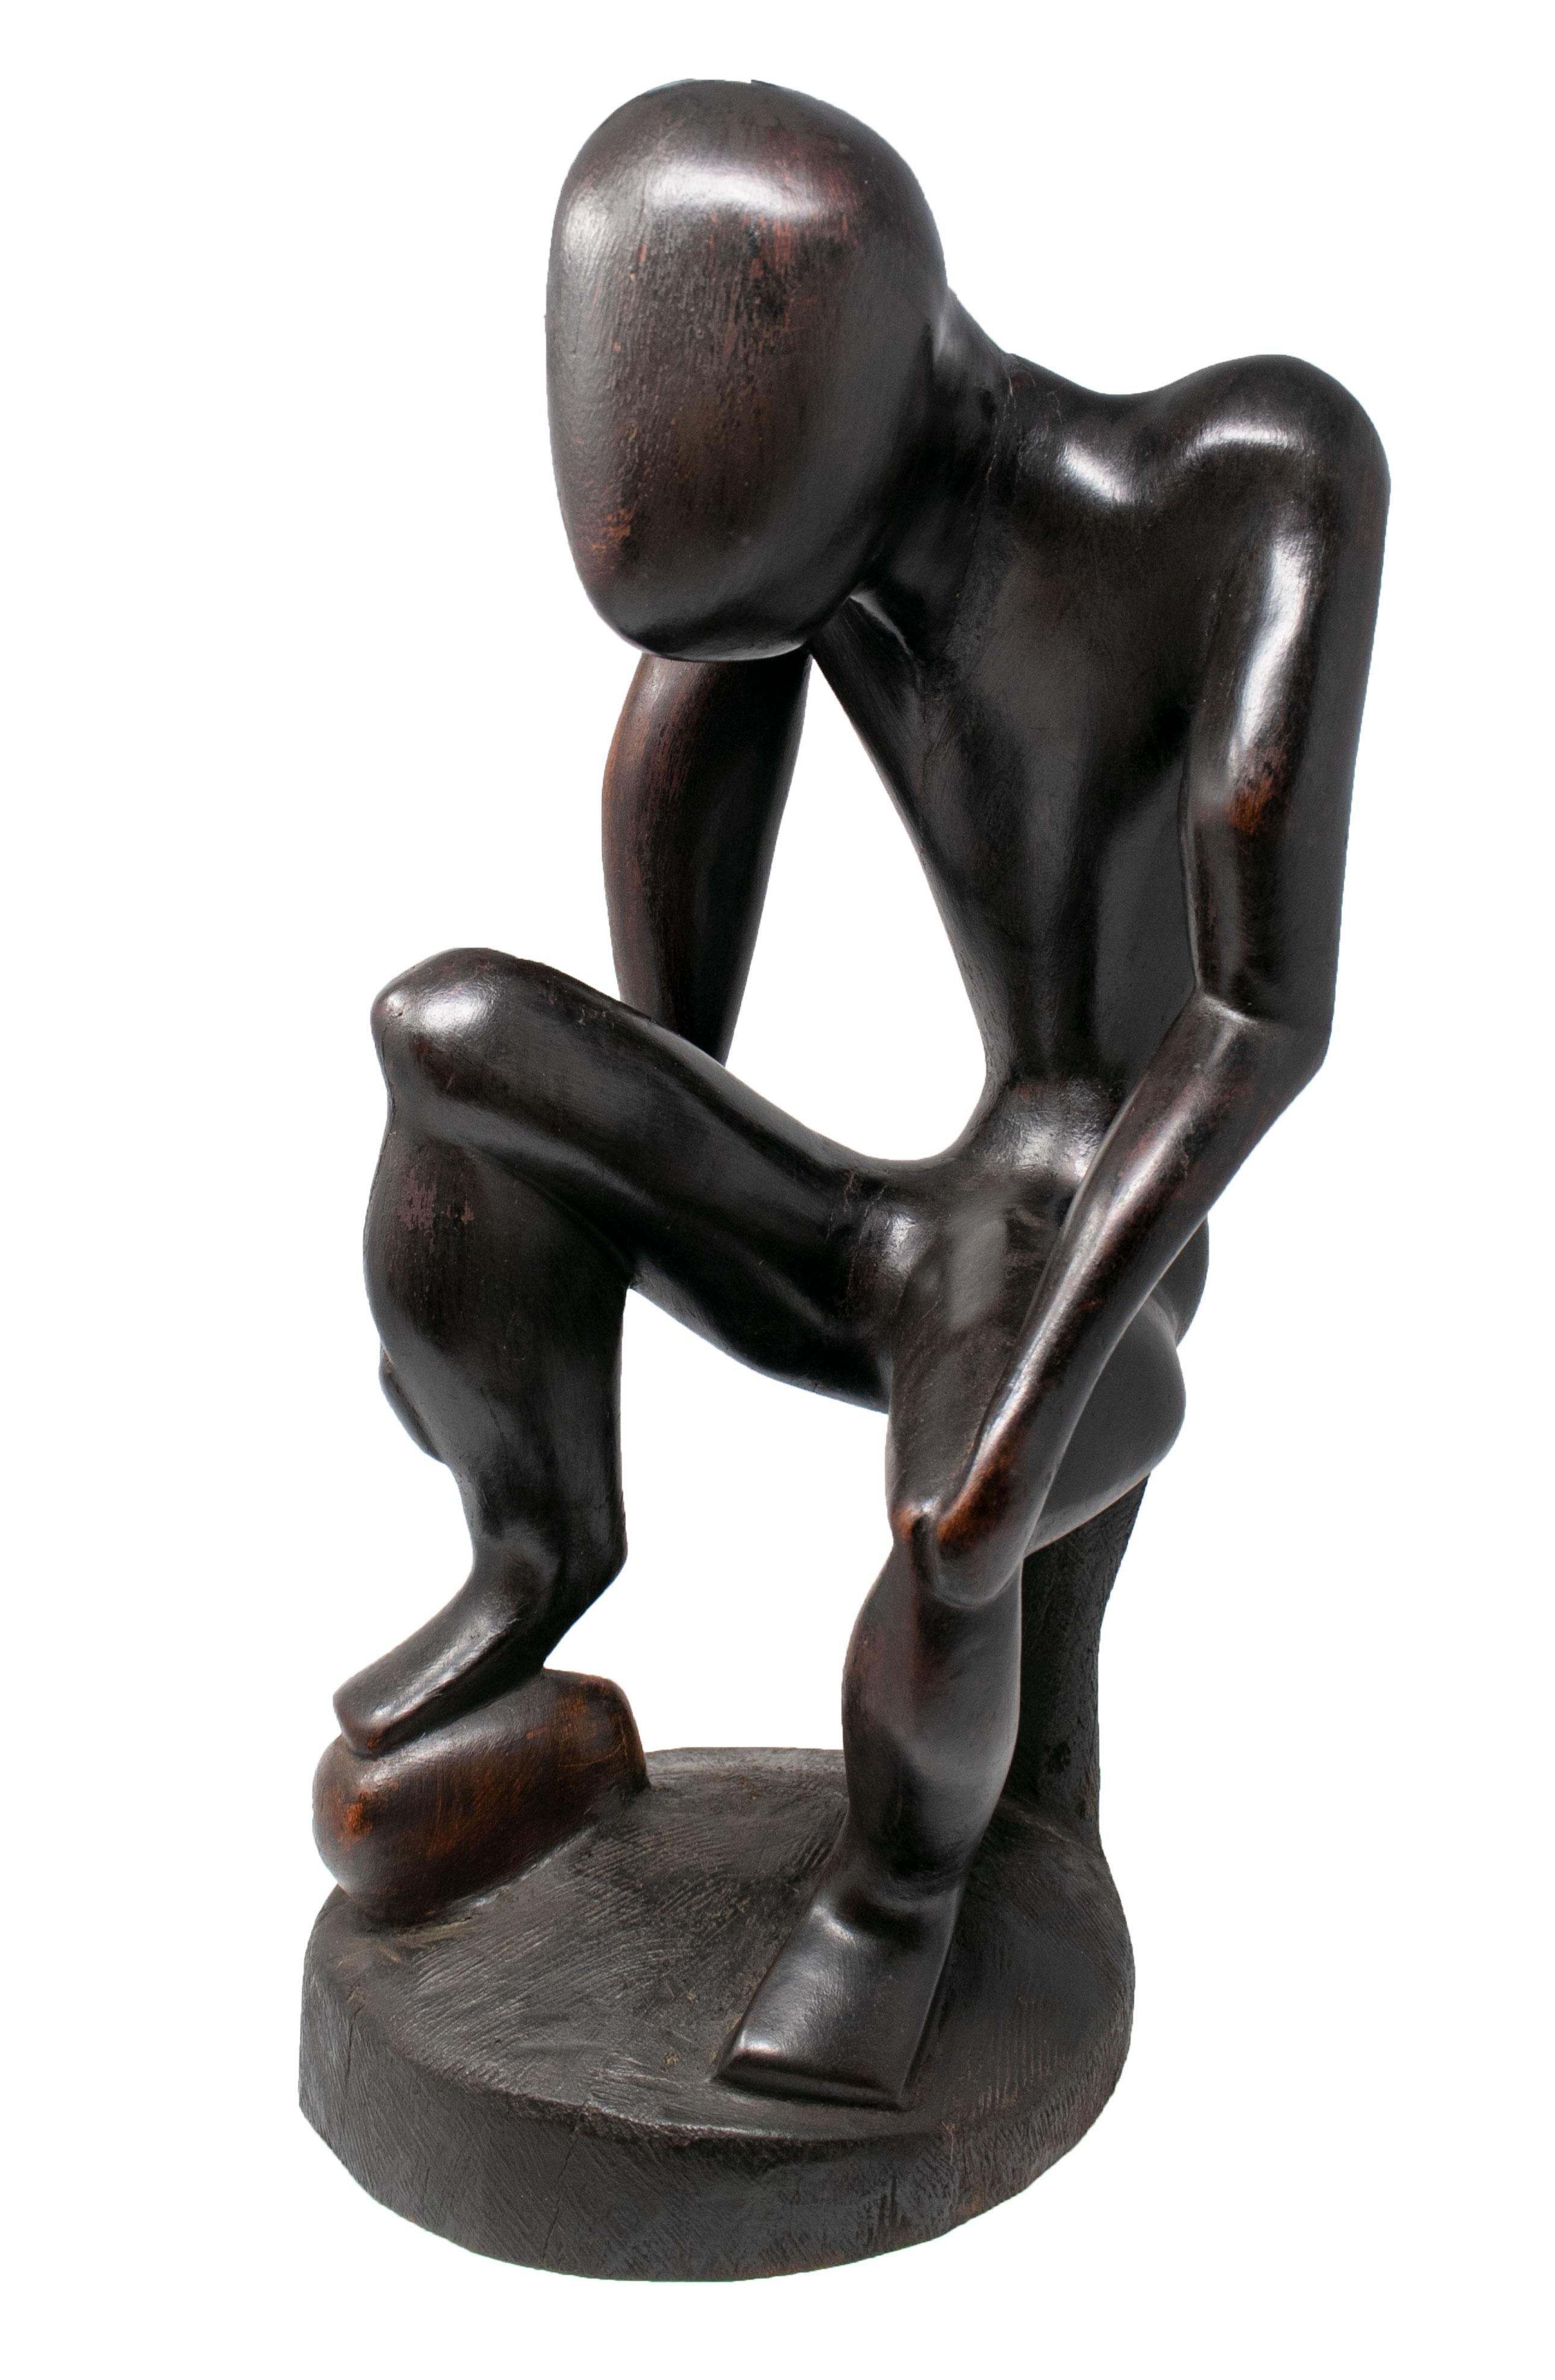 20th Century 1970s African Hand Carved Wooden Sculpture of Sitting Man